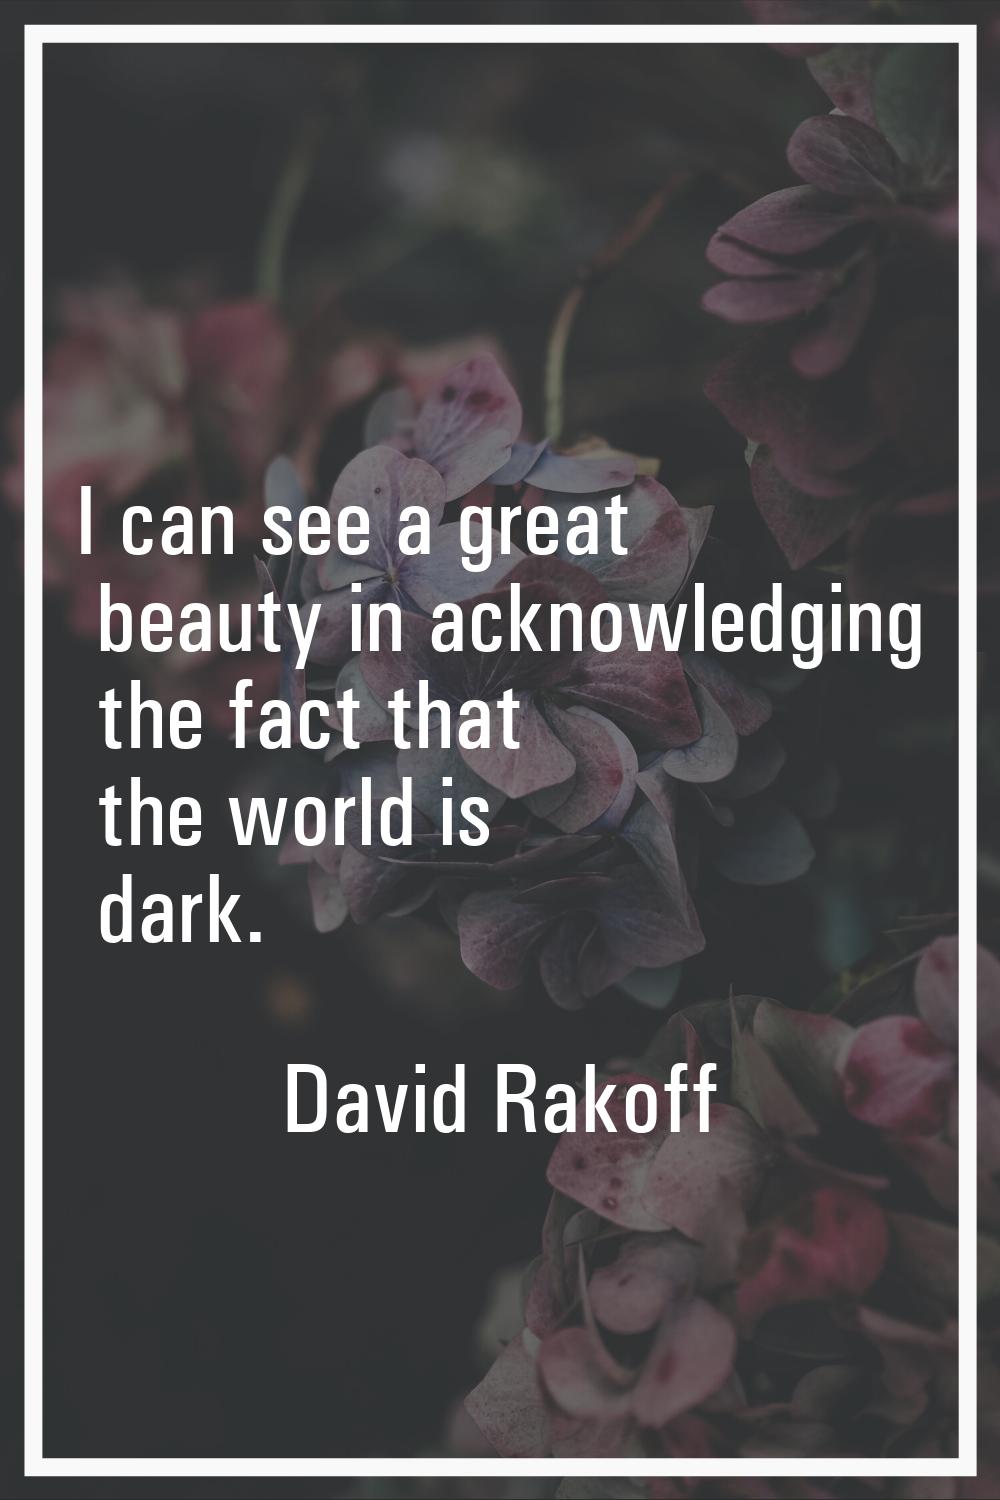 I can see a great beauty in acknowledging the fact that the world is dark.